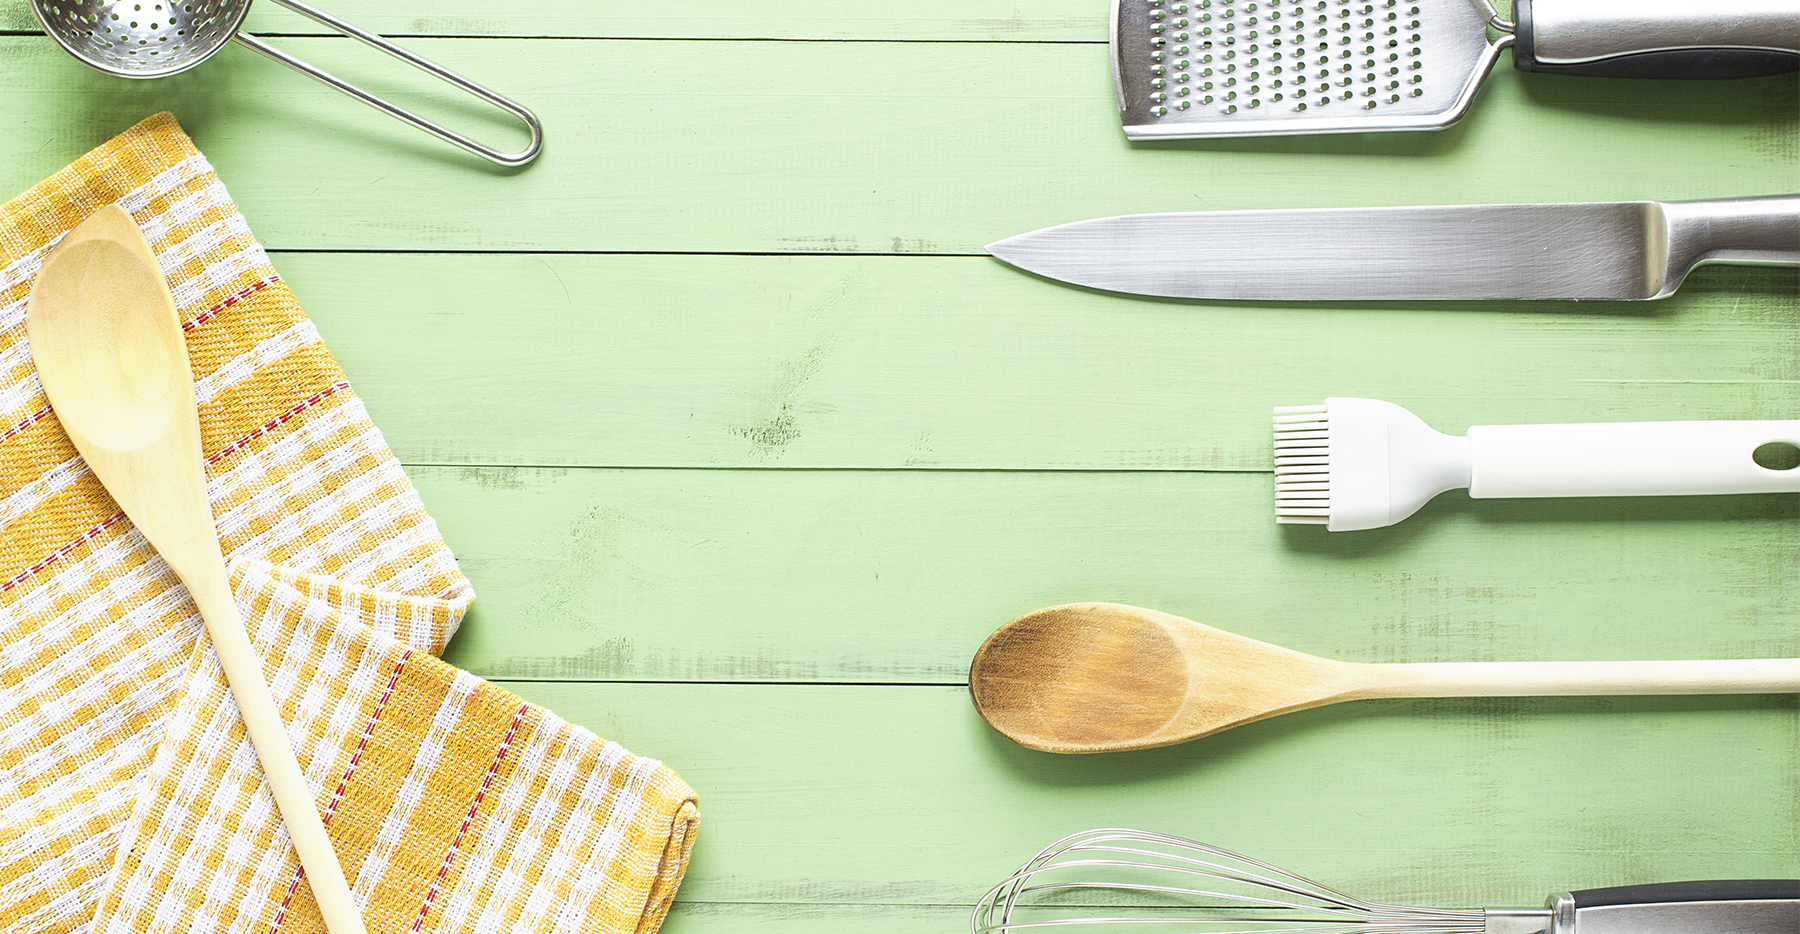 The Ultimate List Of Kitchen Tools For Healthy Cooking